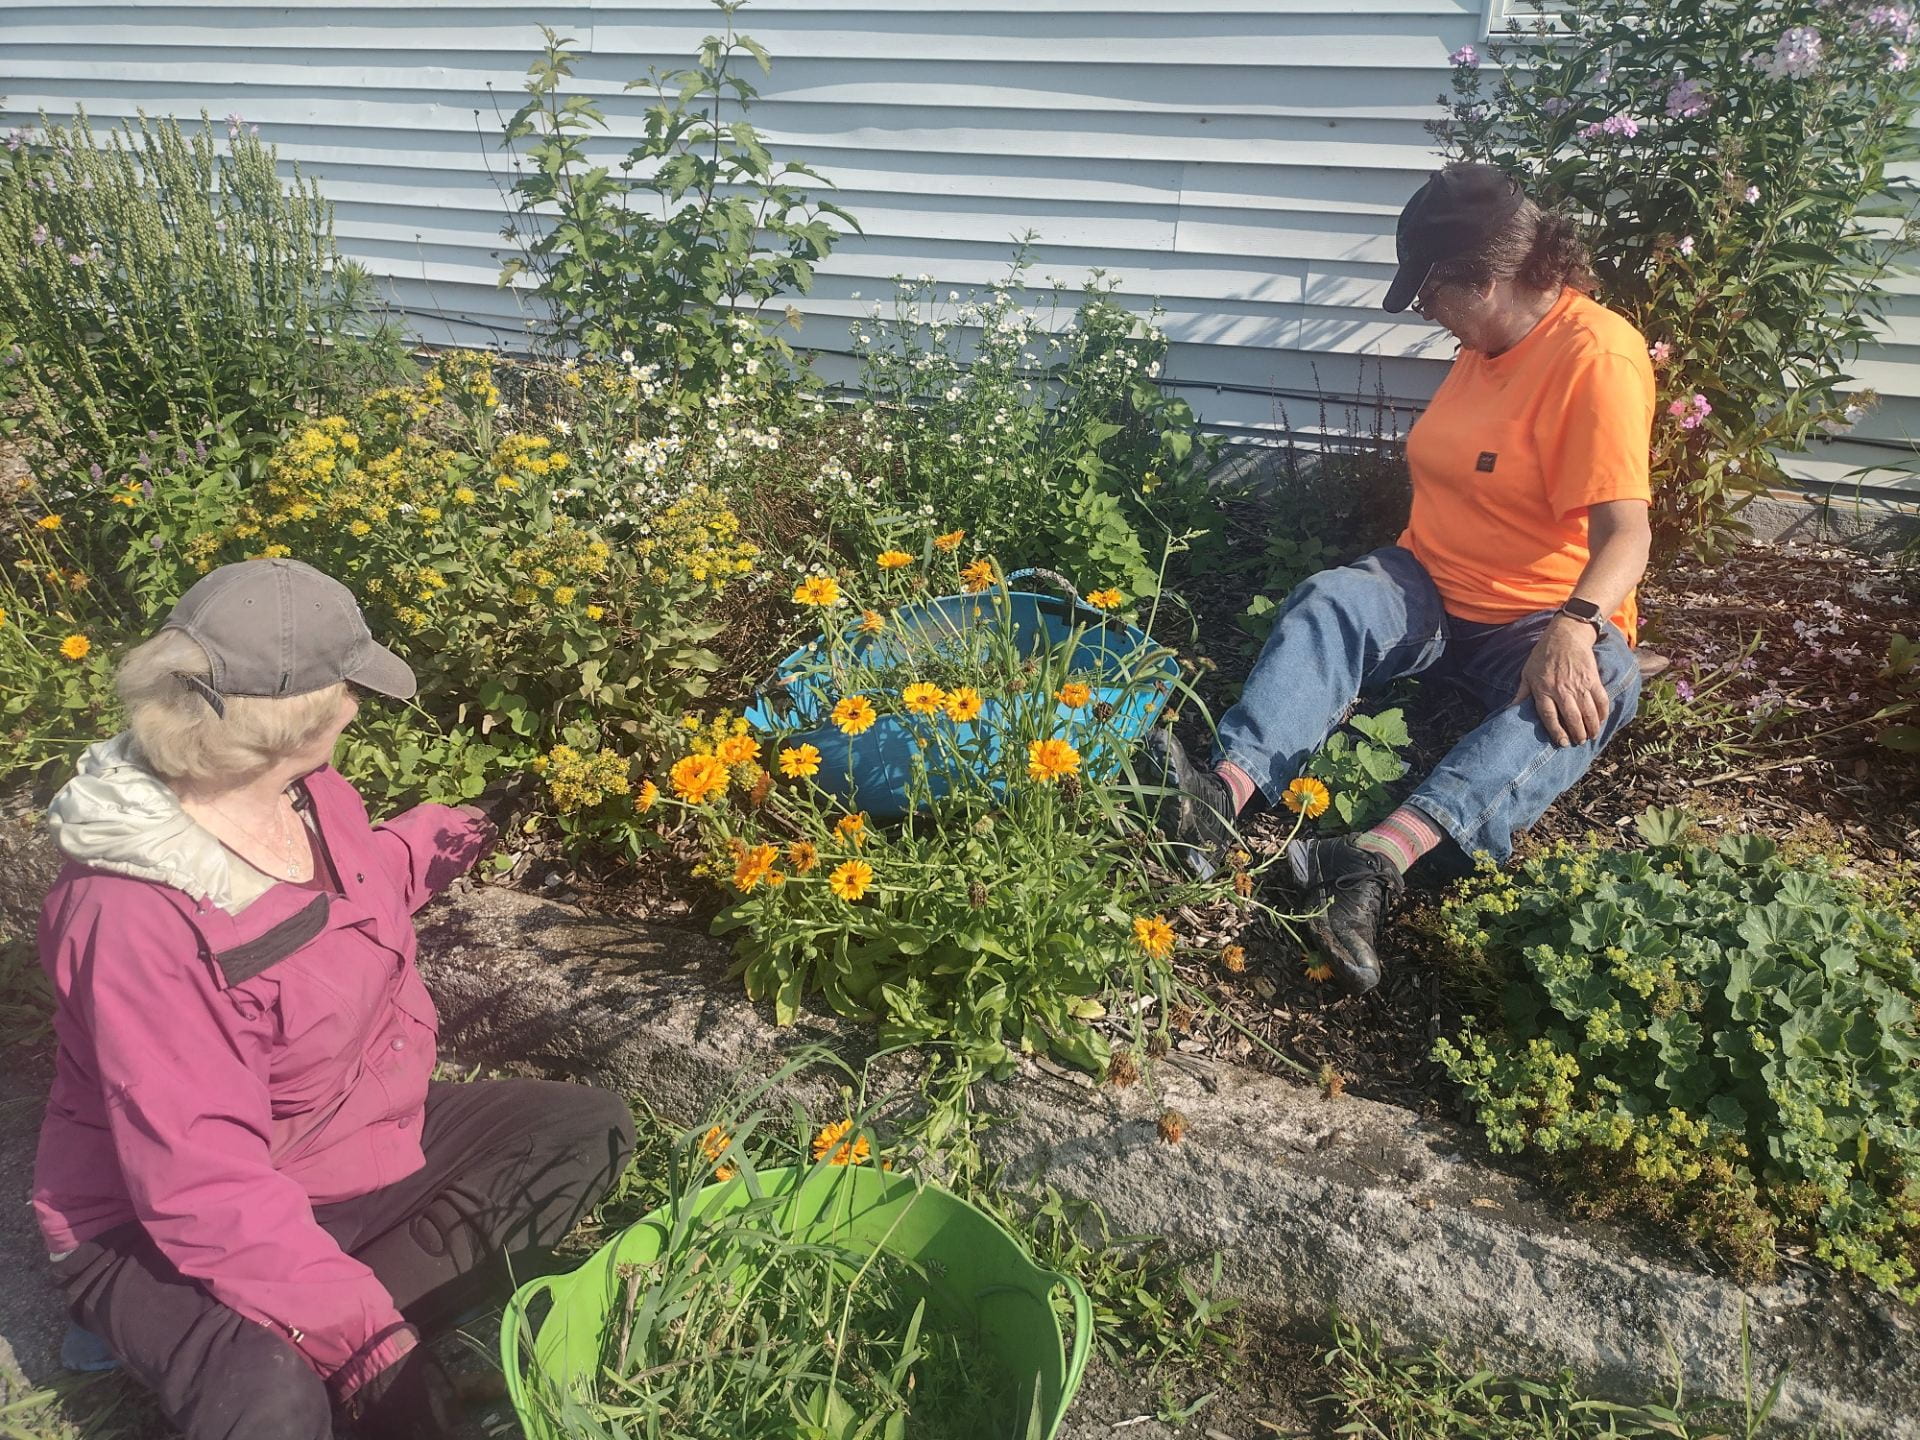 Nancy (left) and Laurie (right) weeding the pollinator garden